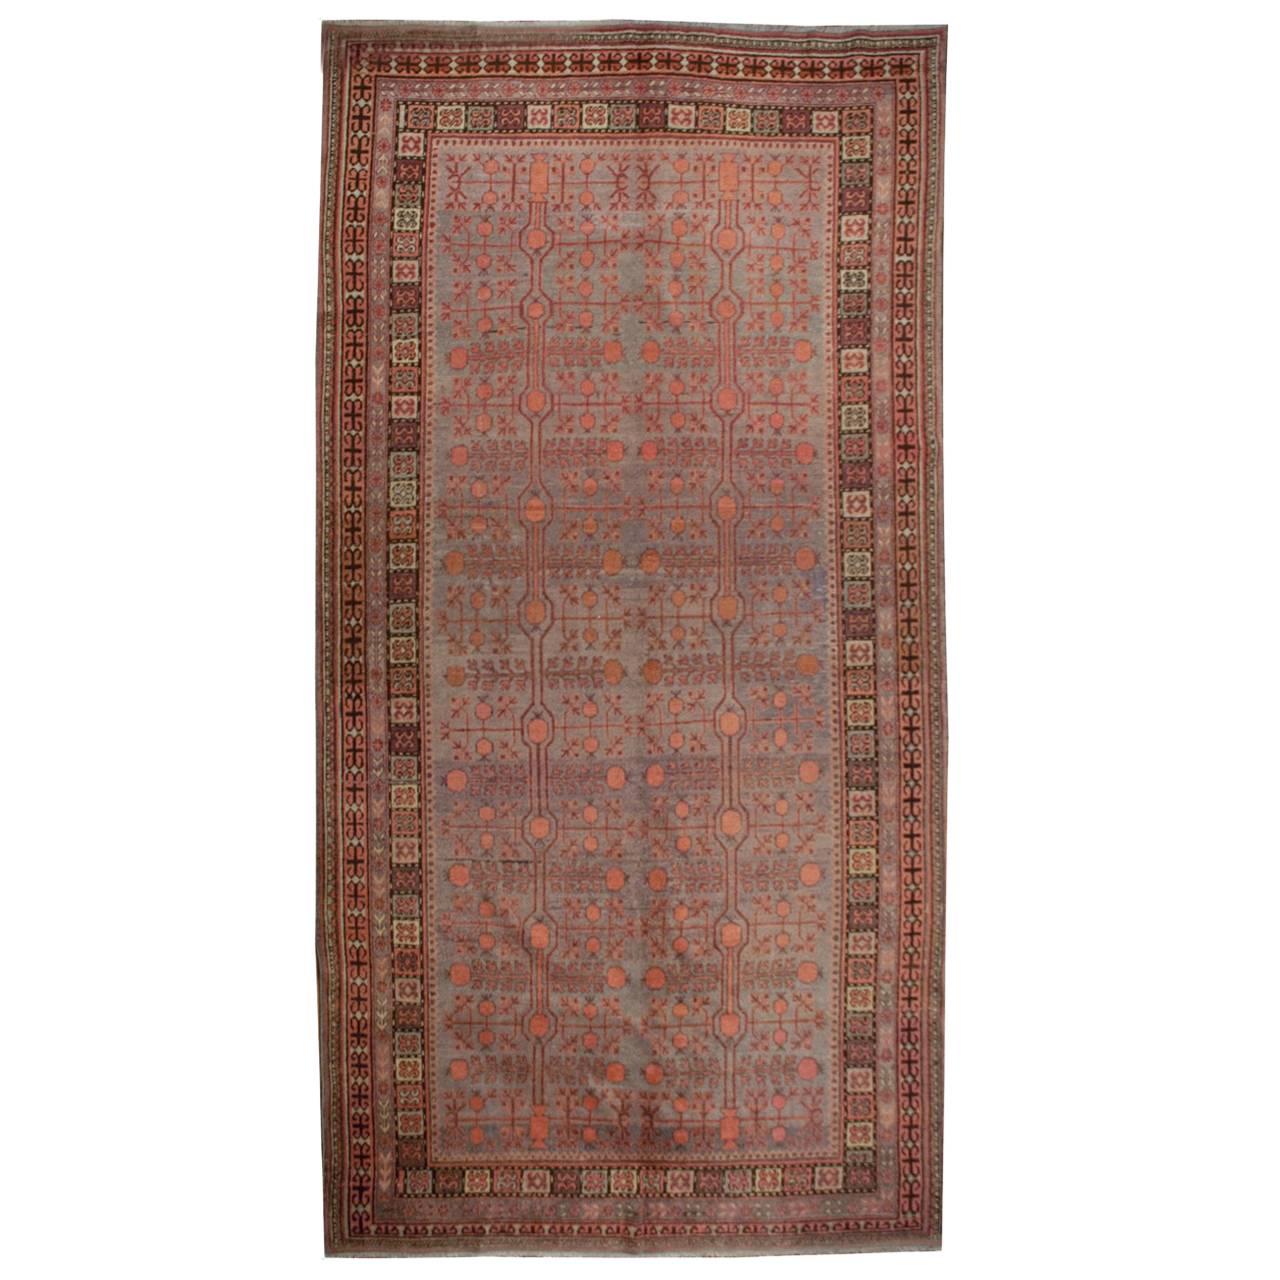 Antique Early 20th Century Samarkand Rug